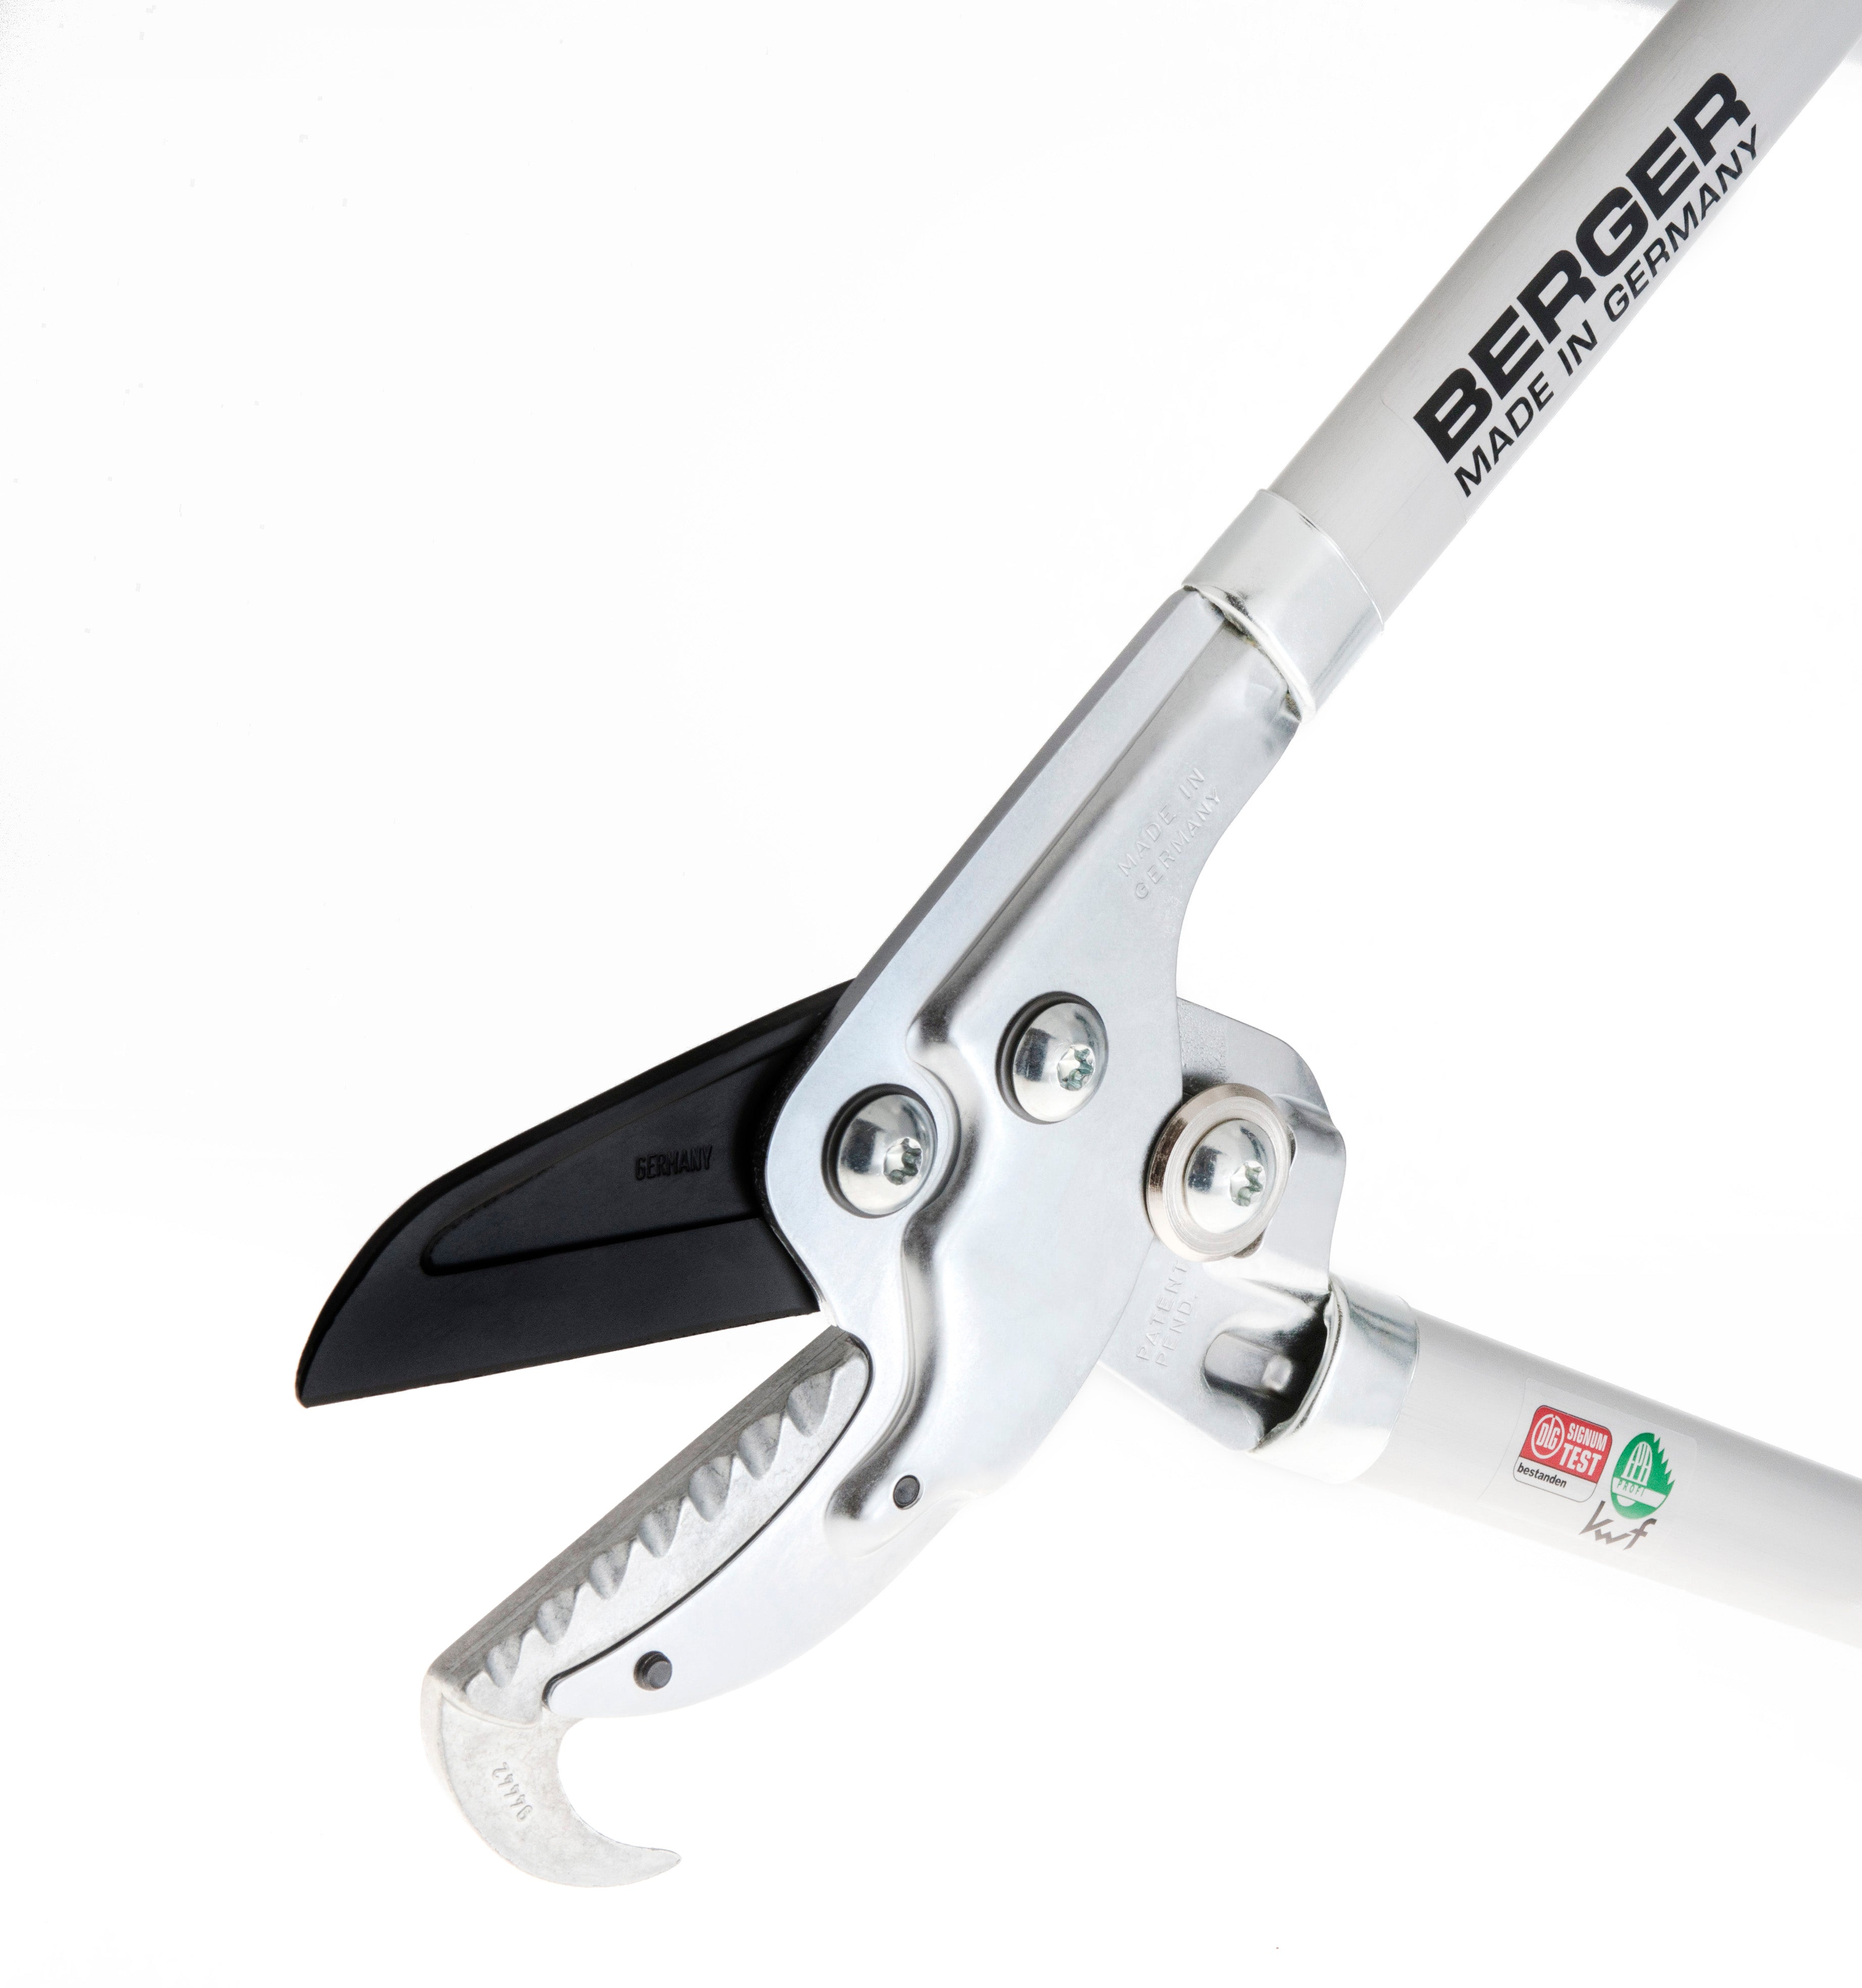 PROFESSIONAL LOPPING SHEAR, ANVIL #4255